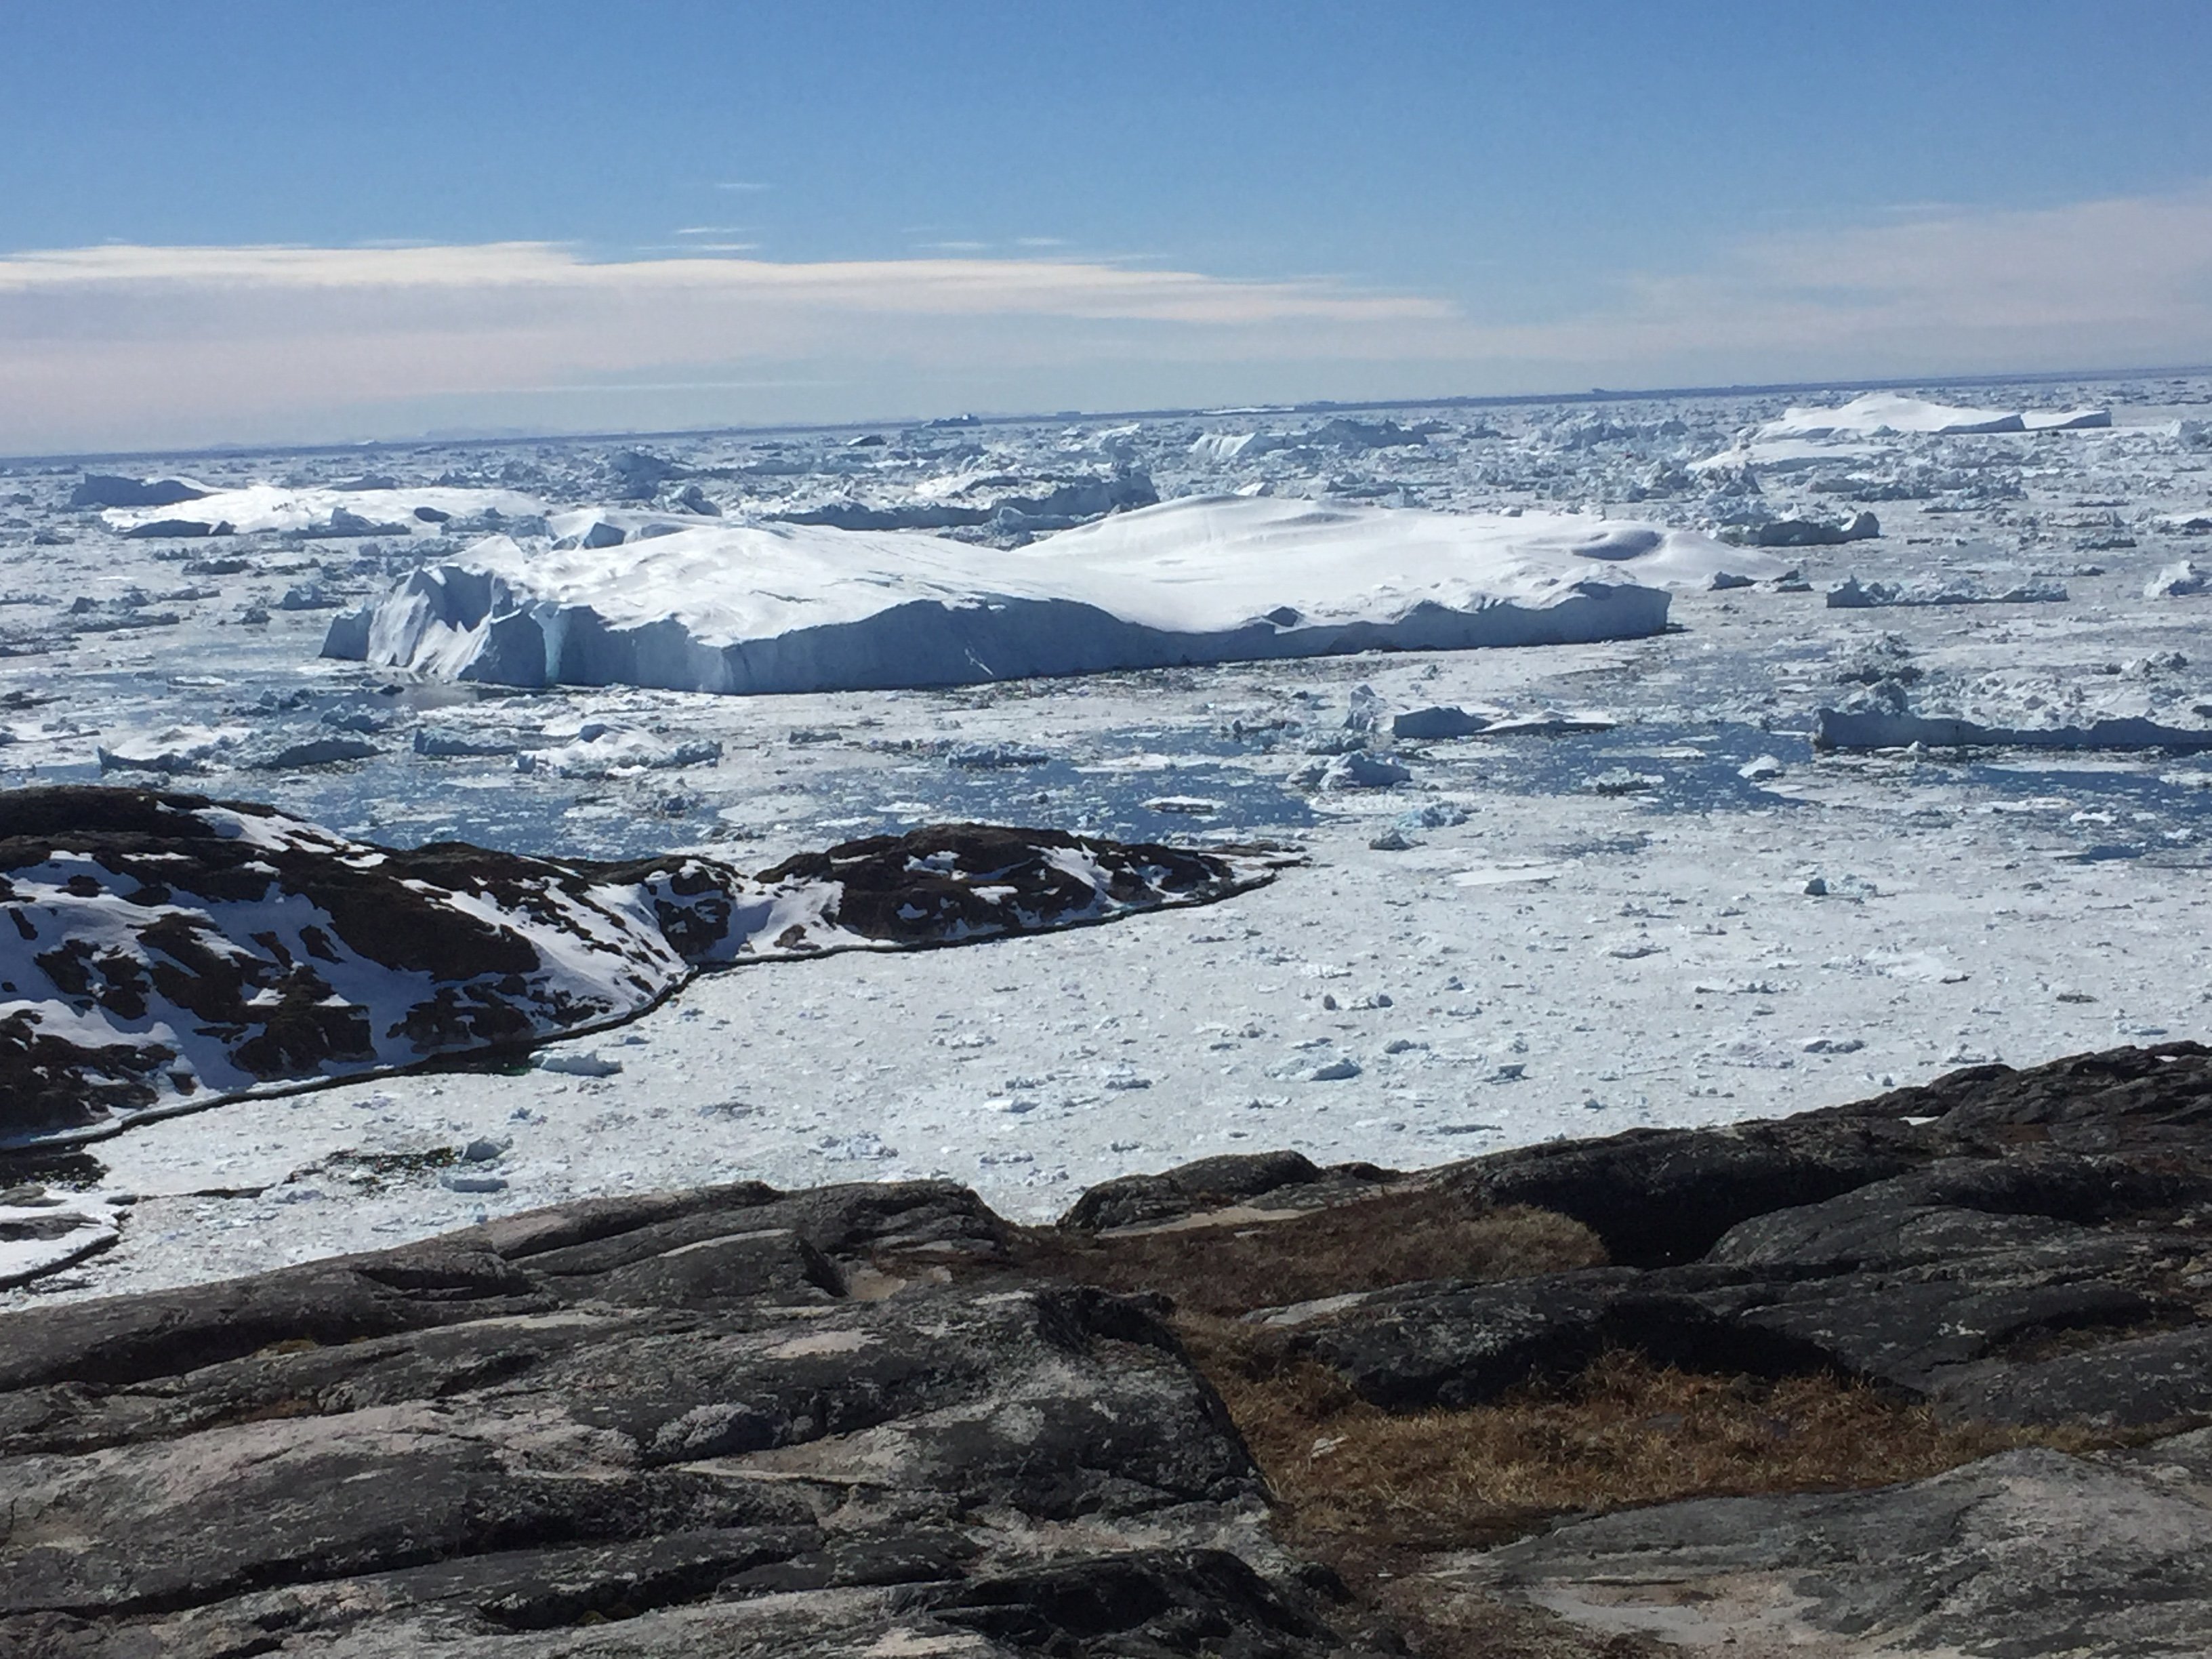 In Greenland, the Only Certainty is Change